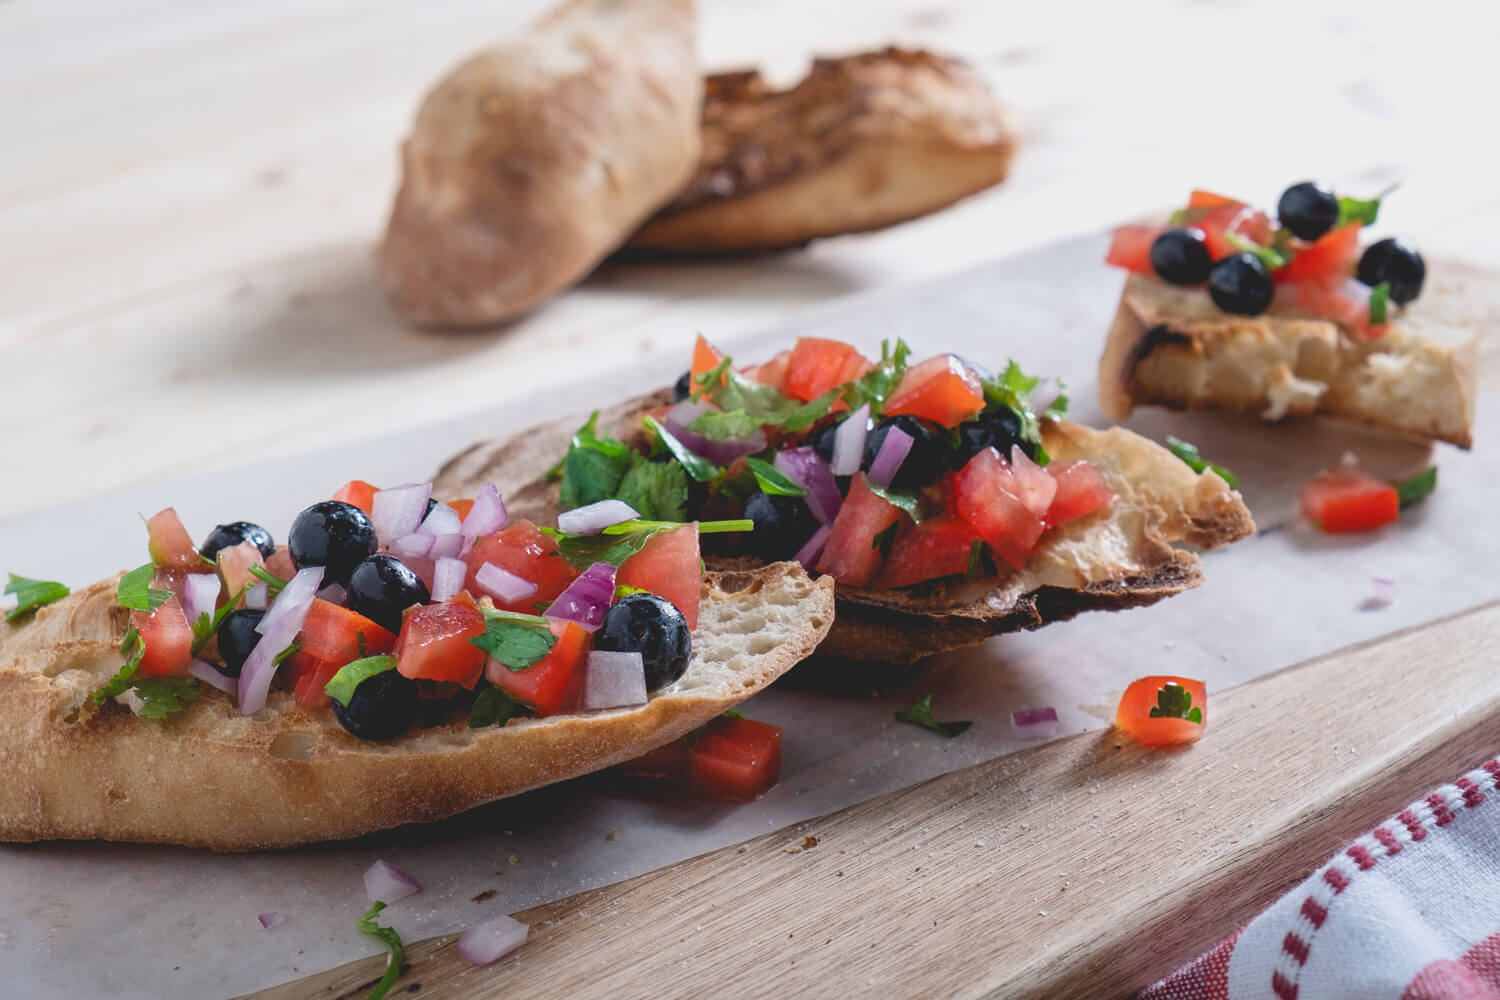 Prep time: 15 Minutes Cook time: N/A Serves: 4 People CHEF’S TIP: To make this recipe into a bruschetta salads simple omit bread and add your favorite greens This wild bruschetta screams summer time. Perfect for any picnic, appetizer or afternoon pick-me-up!